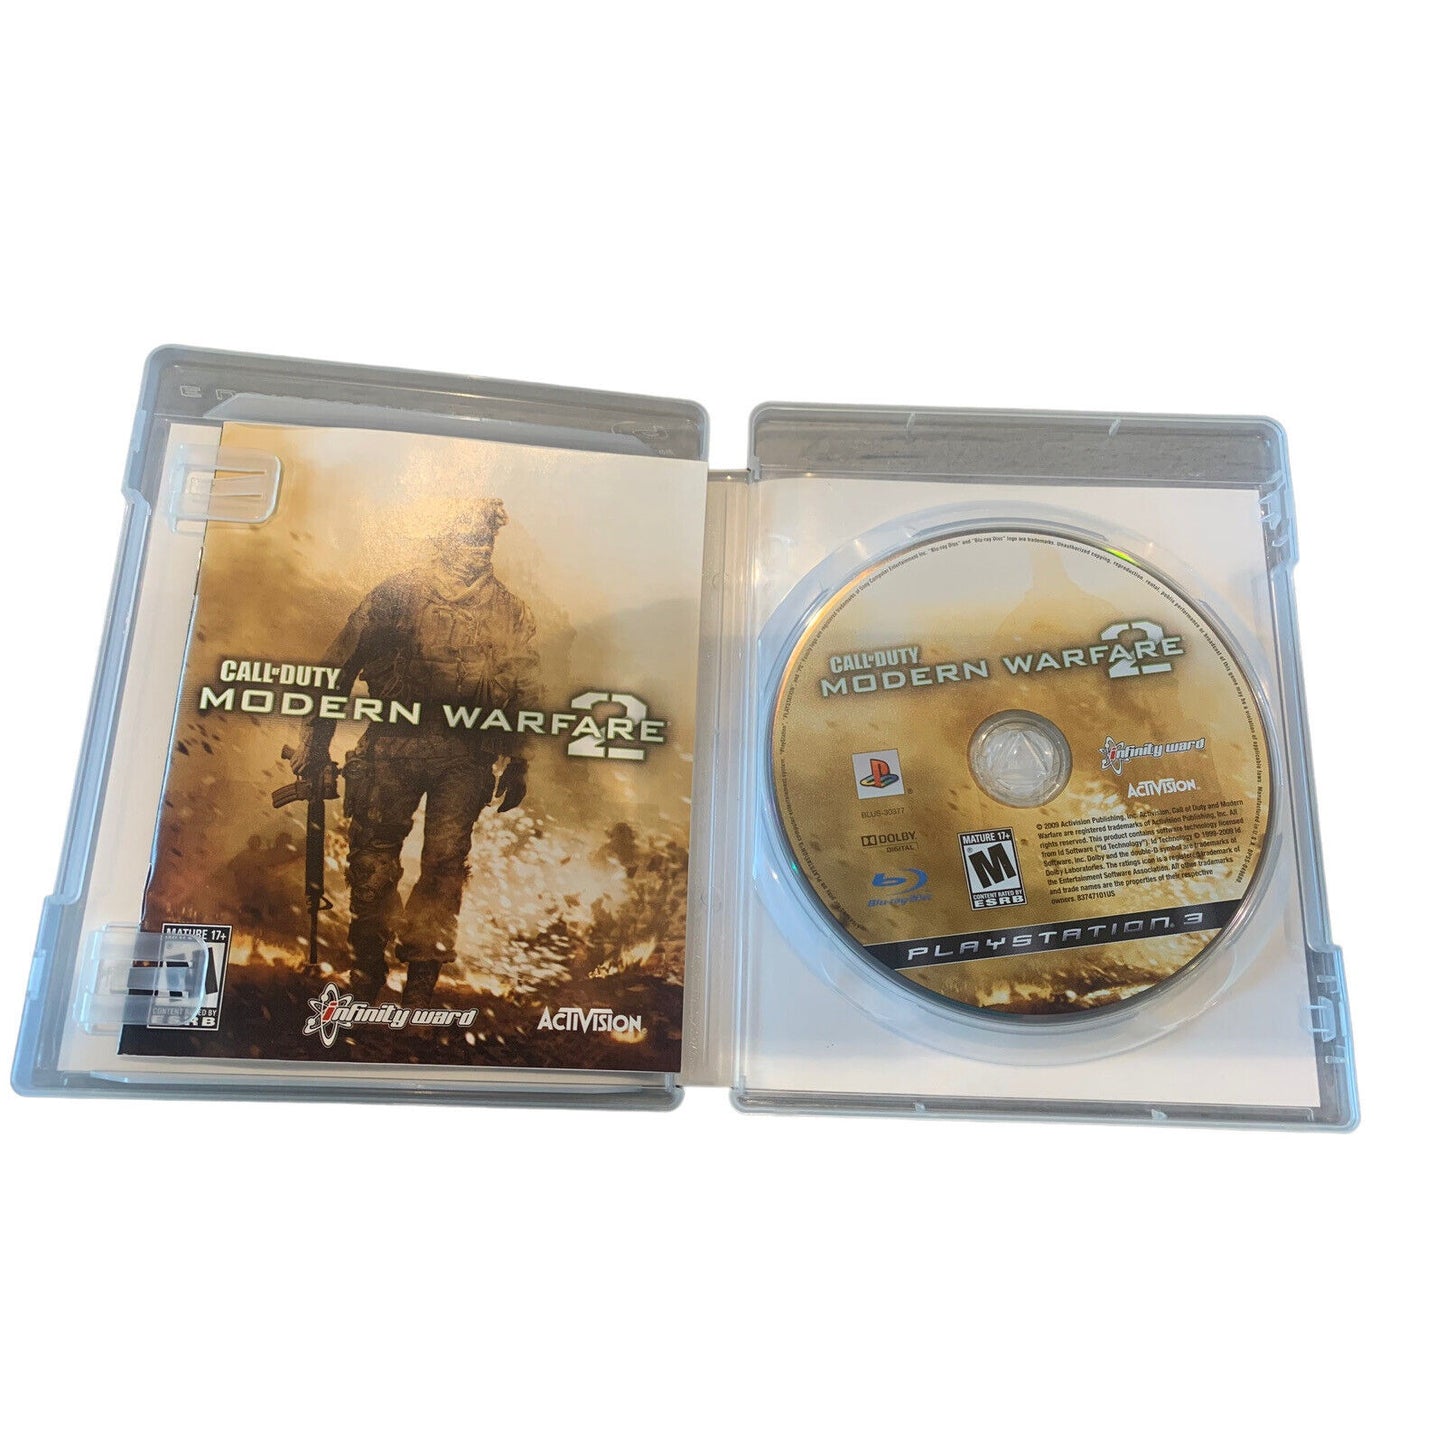 Game Disc And Sleeve Displayed In Opened Case